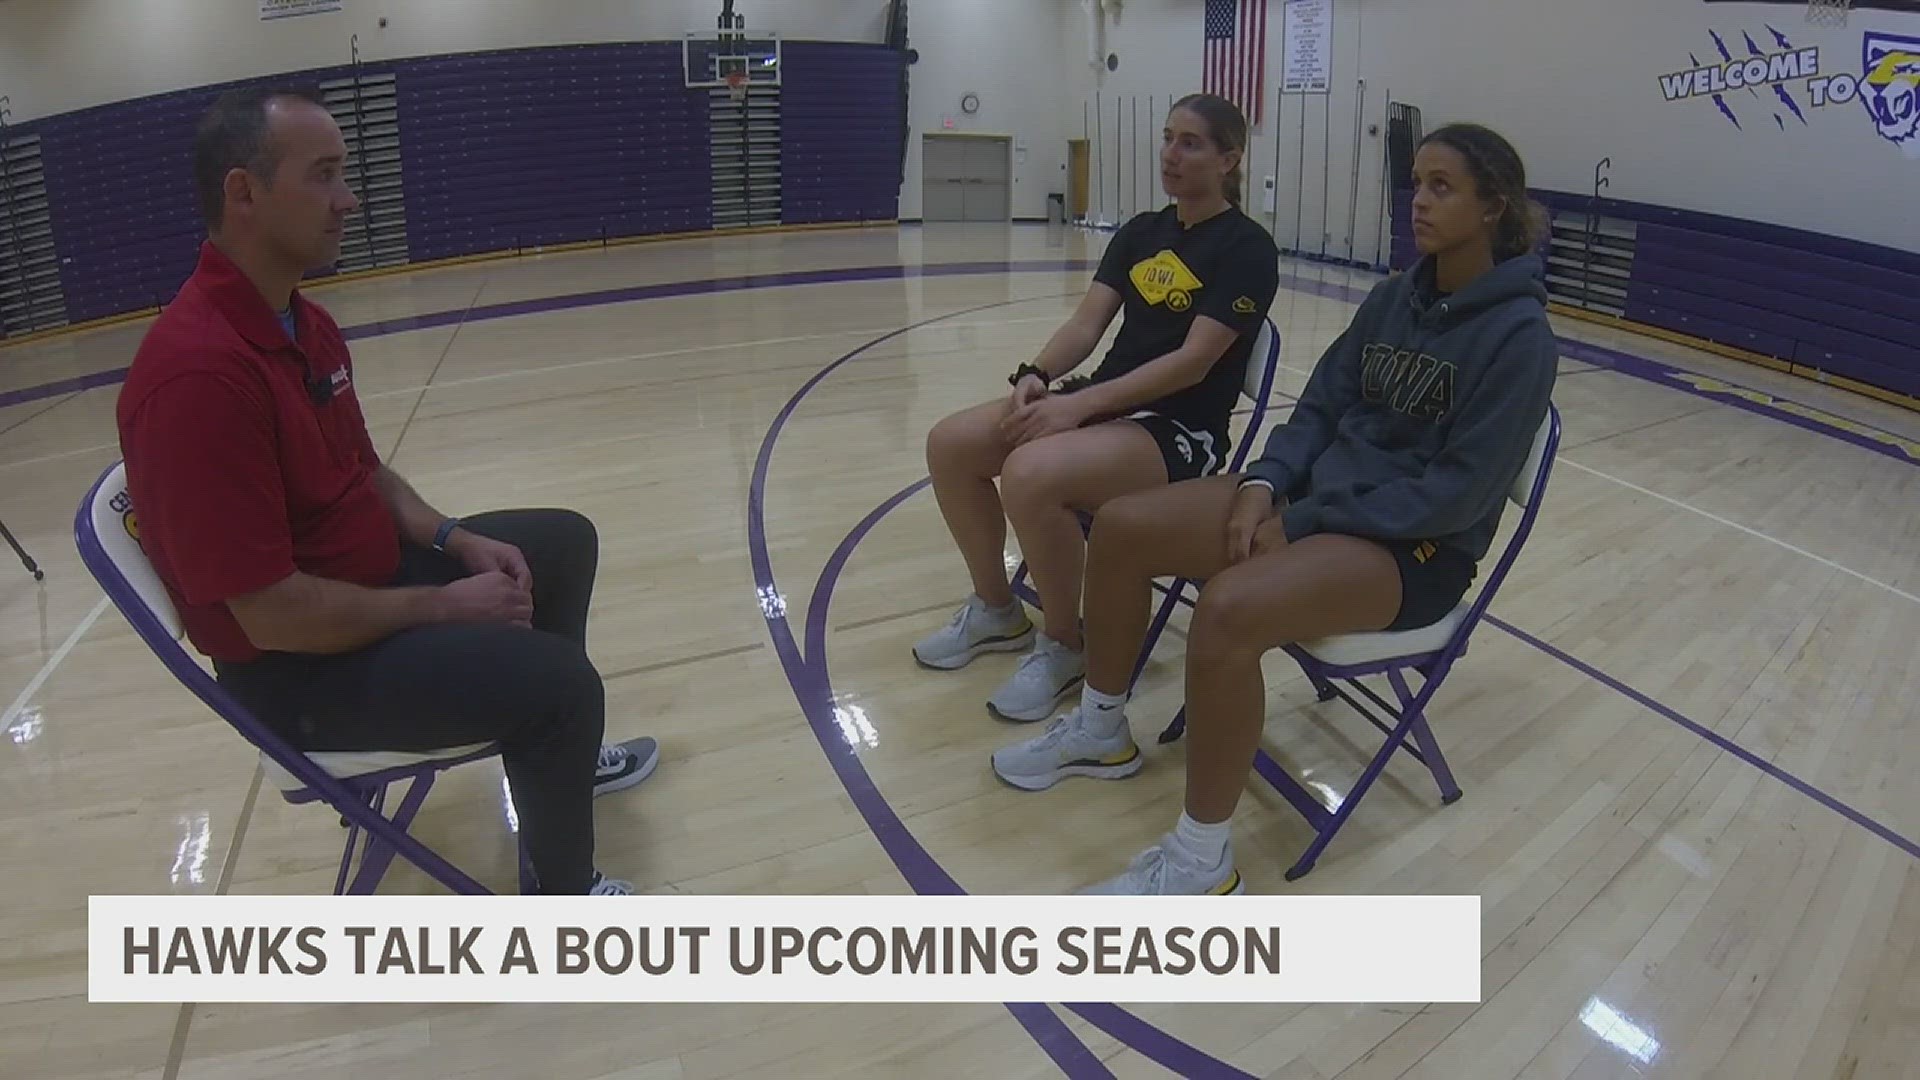 Iowa Women's Basketball Players Kate Martin and Gabbie Marshall talk about the upcoming season and what their off season has been like.